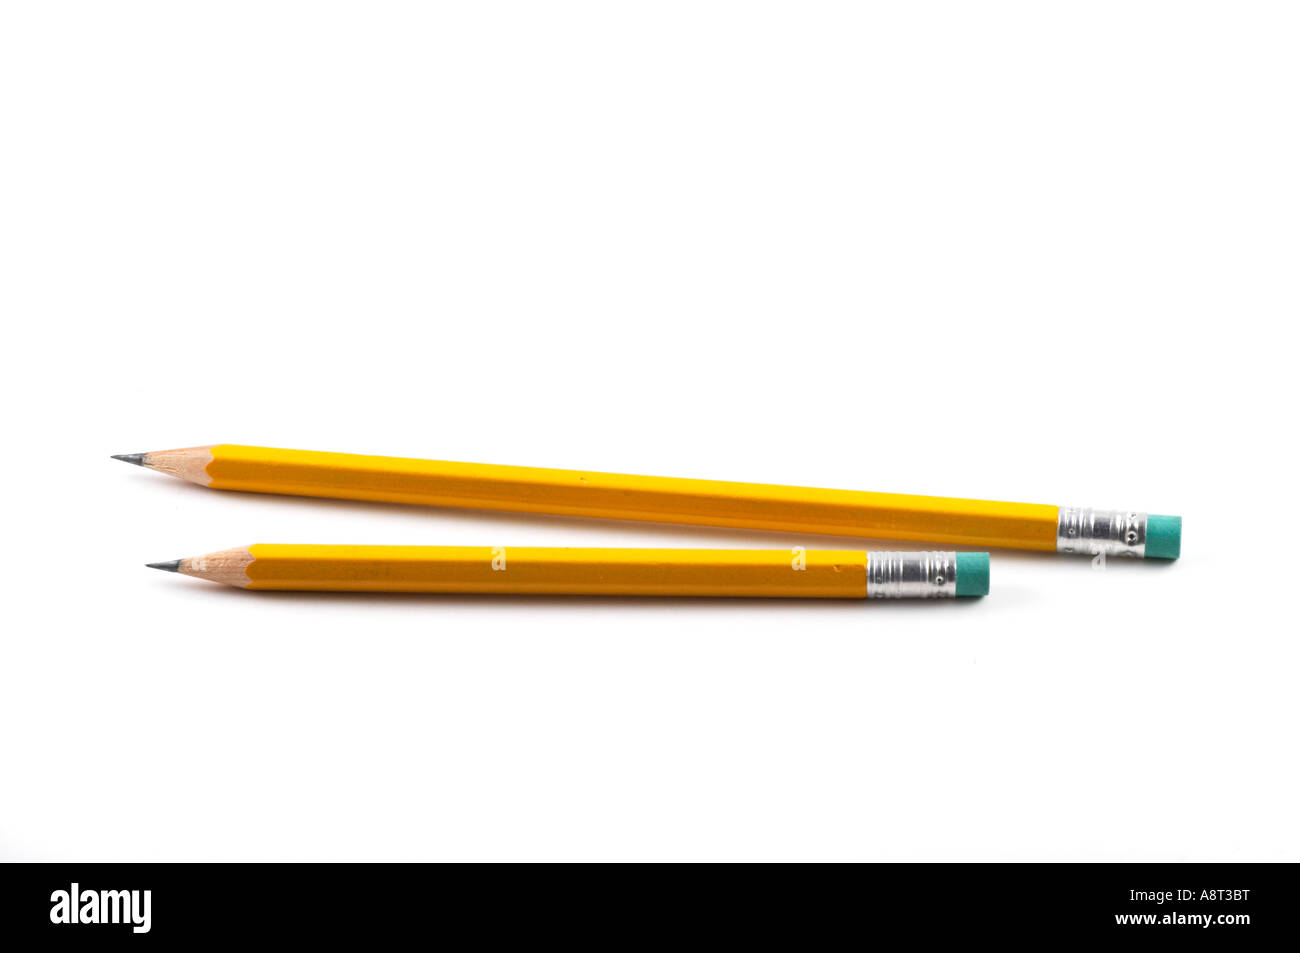 Two Pencils writing or drawing instruments Stock Photo